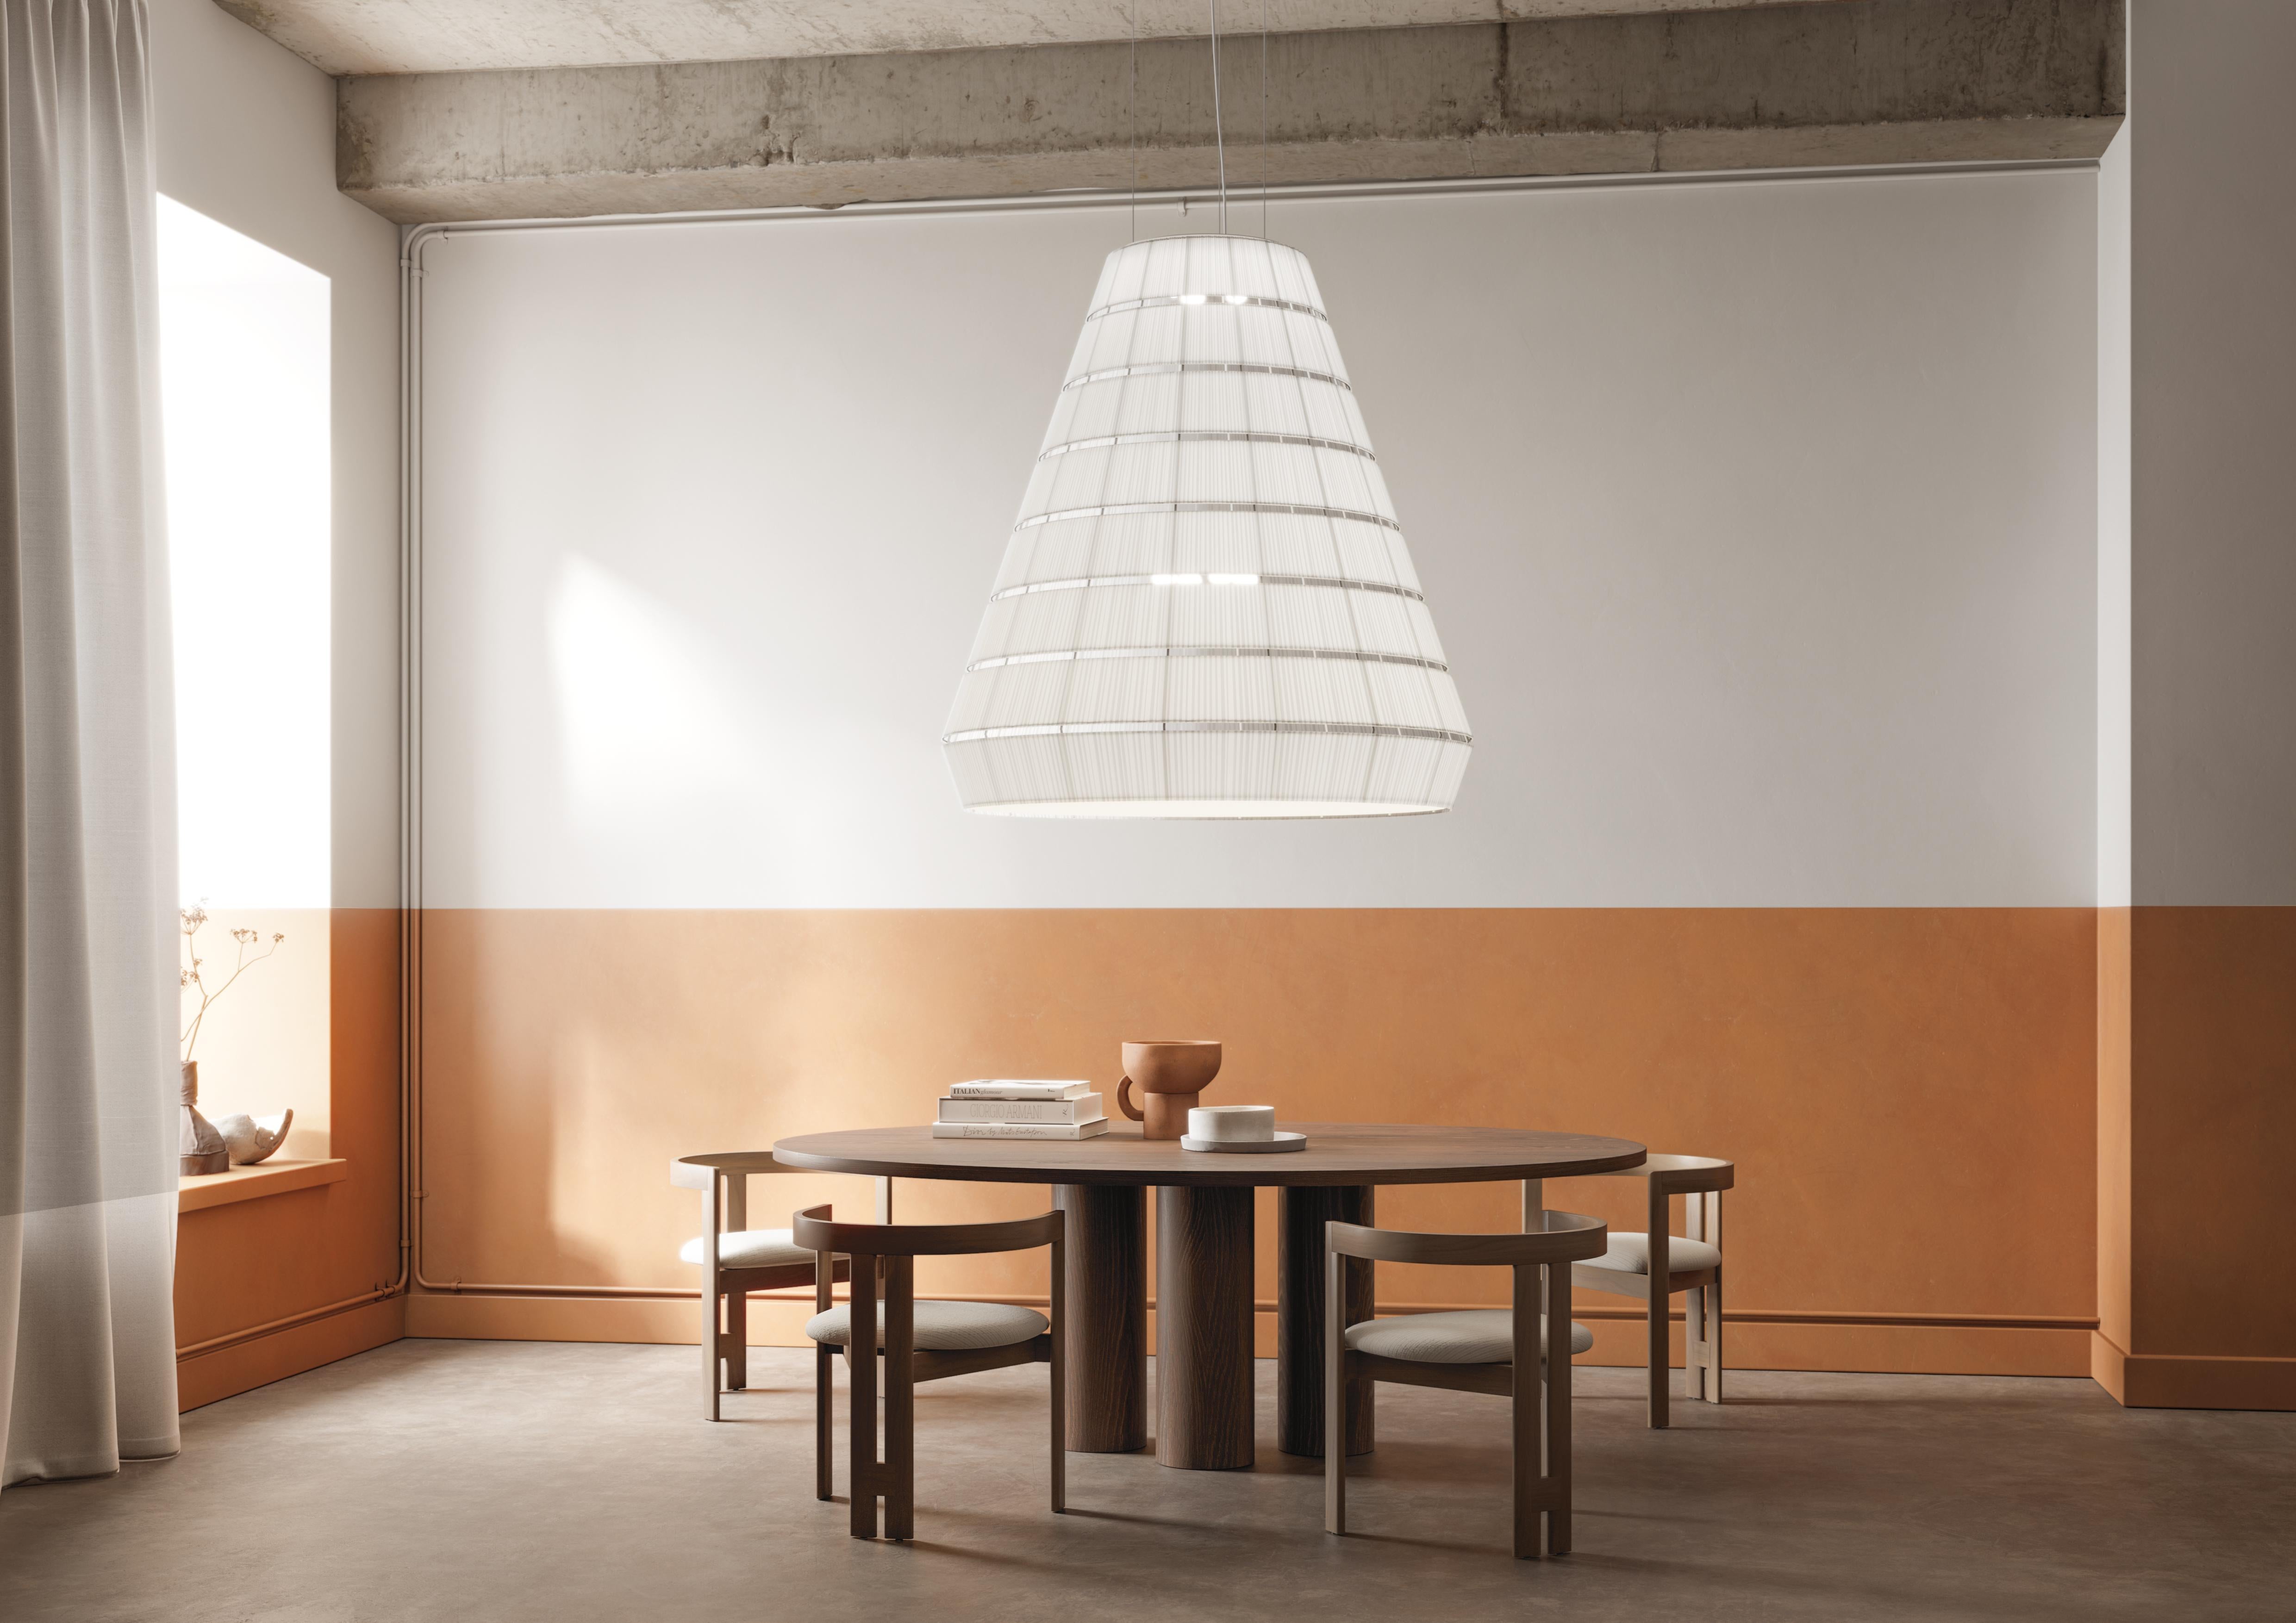 Axolight Layers Type F Pendant Lamp in White Steel by Vanessa Vivian

Layers is a collection of suspension lamps with a strong sculptural presence, obtained through combinations of different geometric shapes. Its layered system is modular, which